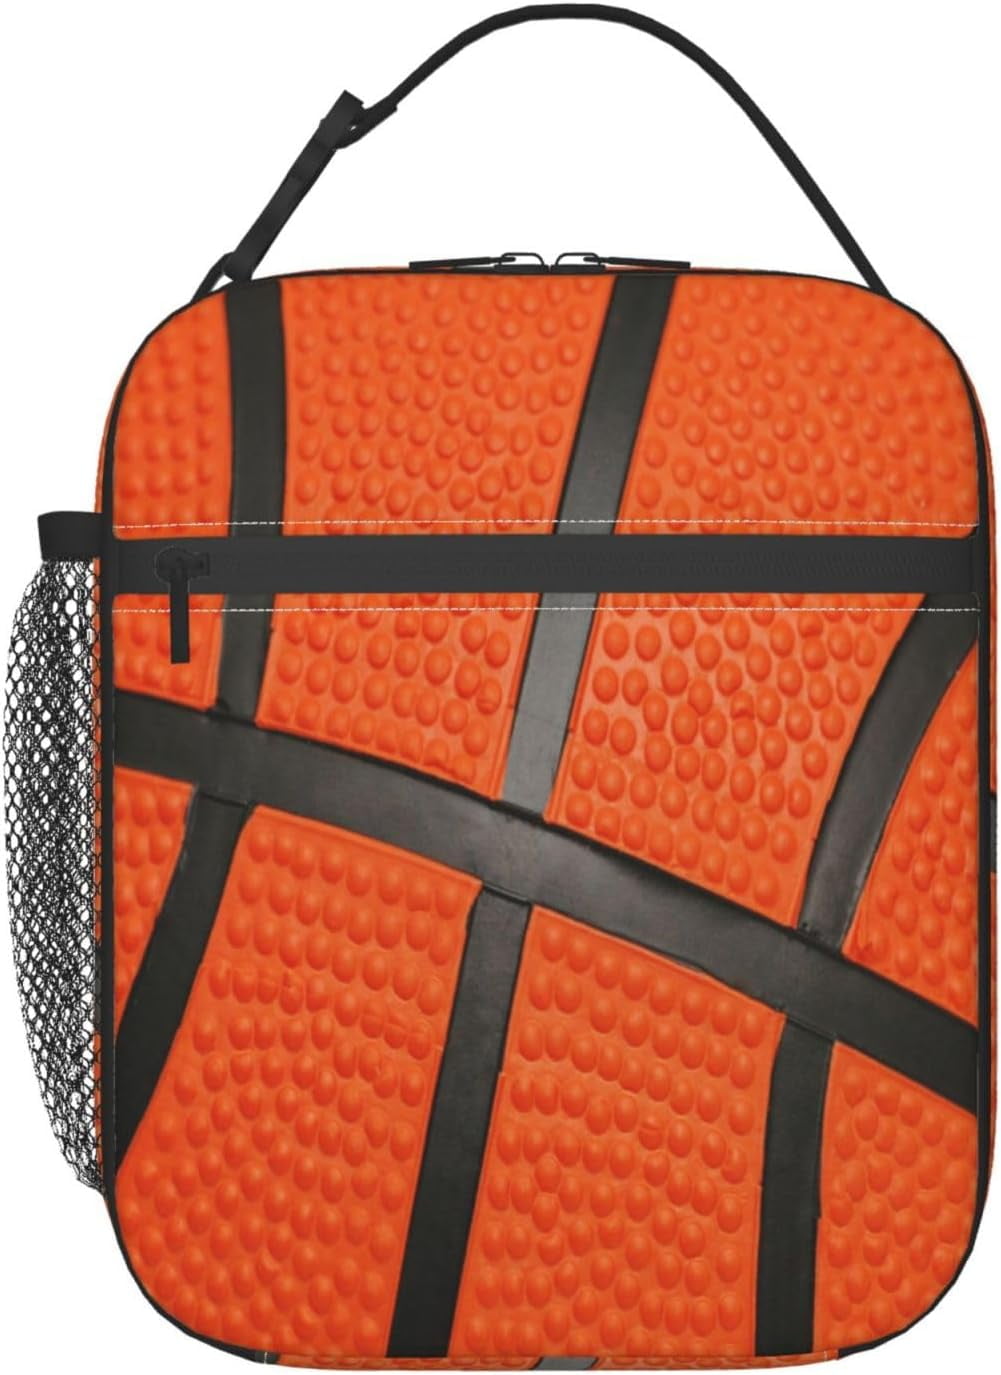 Sport Ball Basketball Lunch Box Portable Insulated Lunch Bag Mini ...